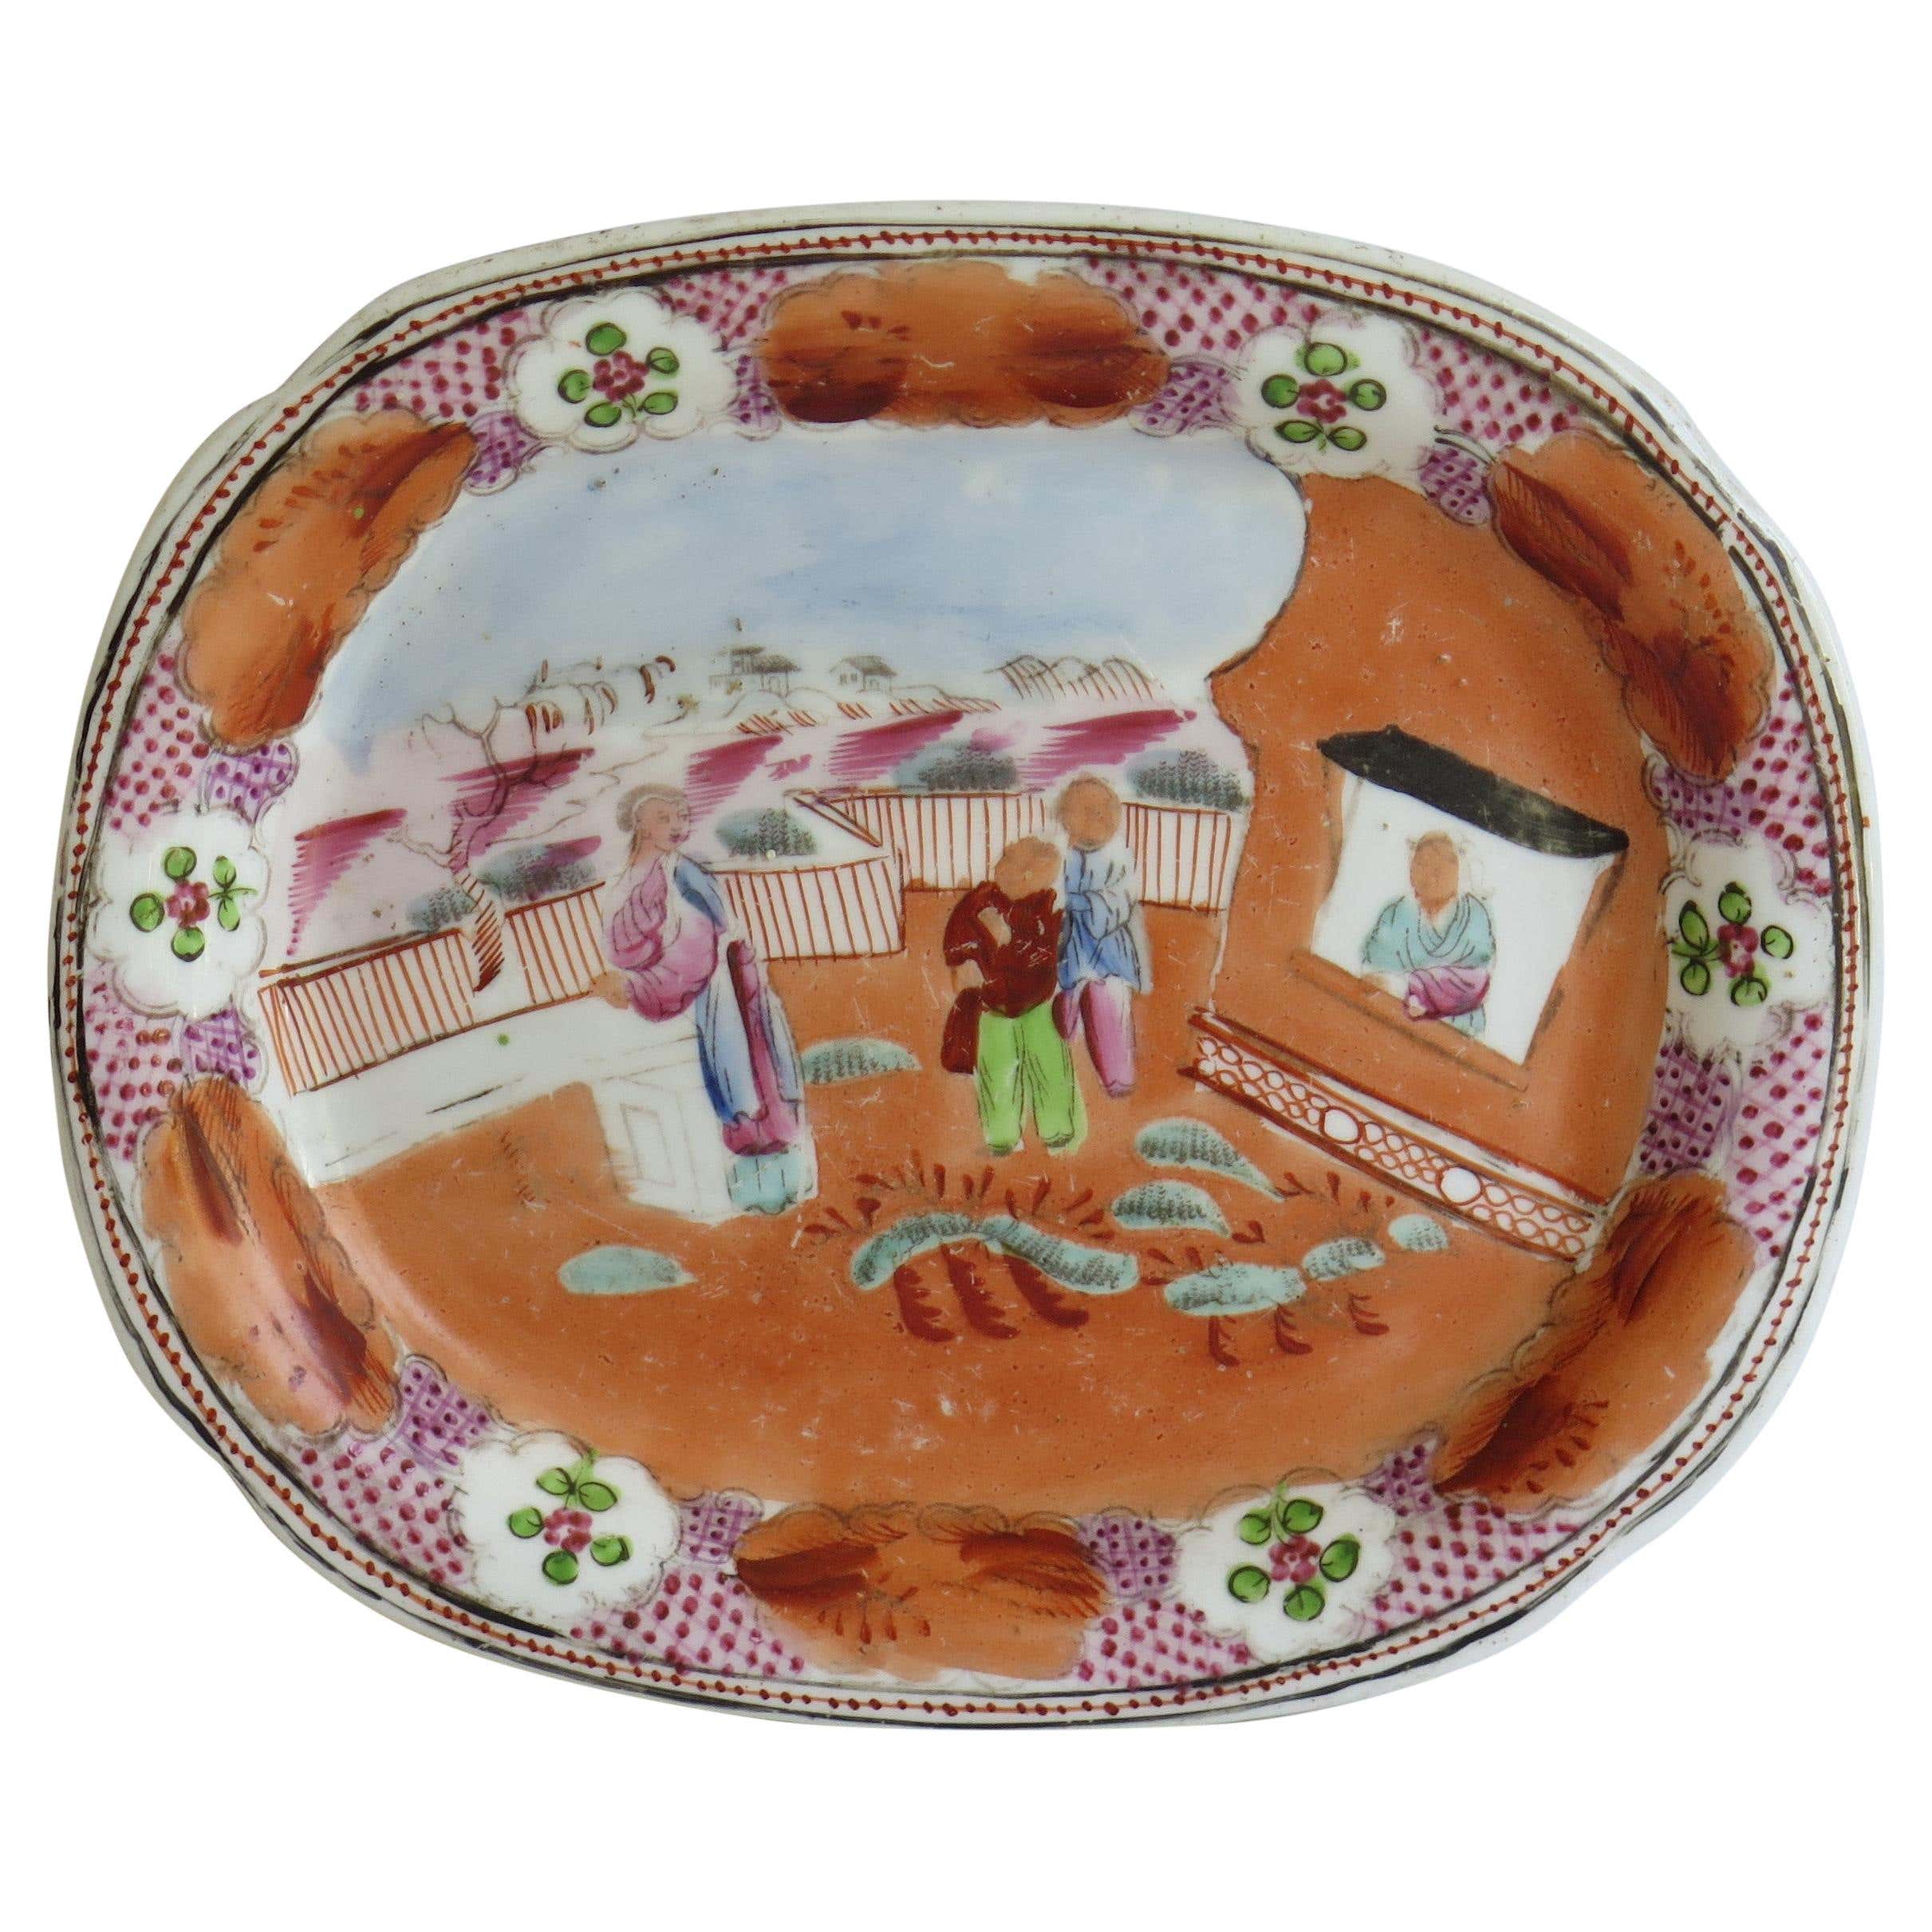 Early New Hall Porcelain Dish with Boy in Window Ptn No.425, circa 1800